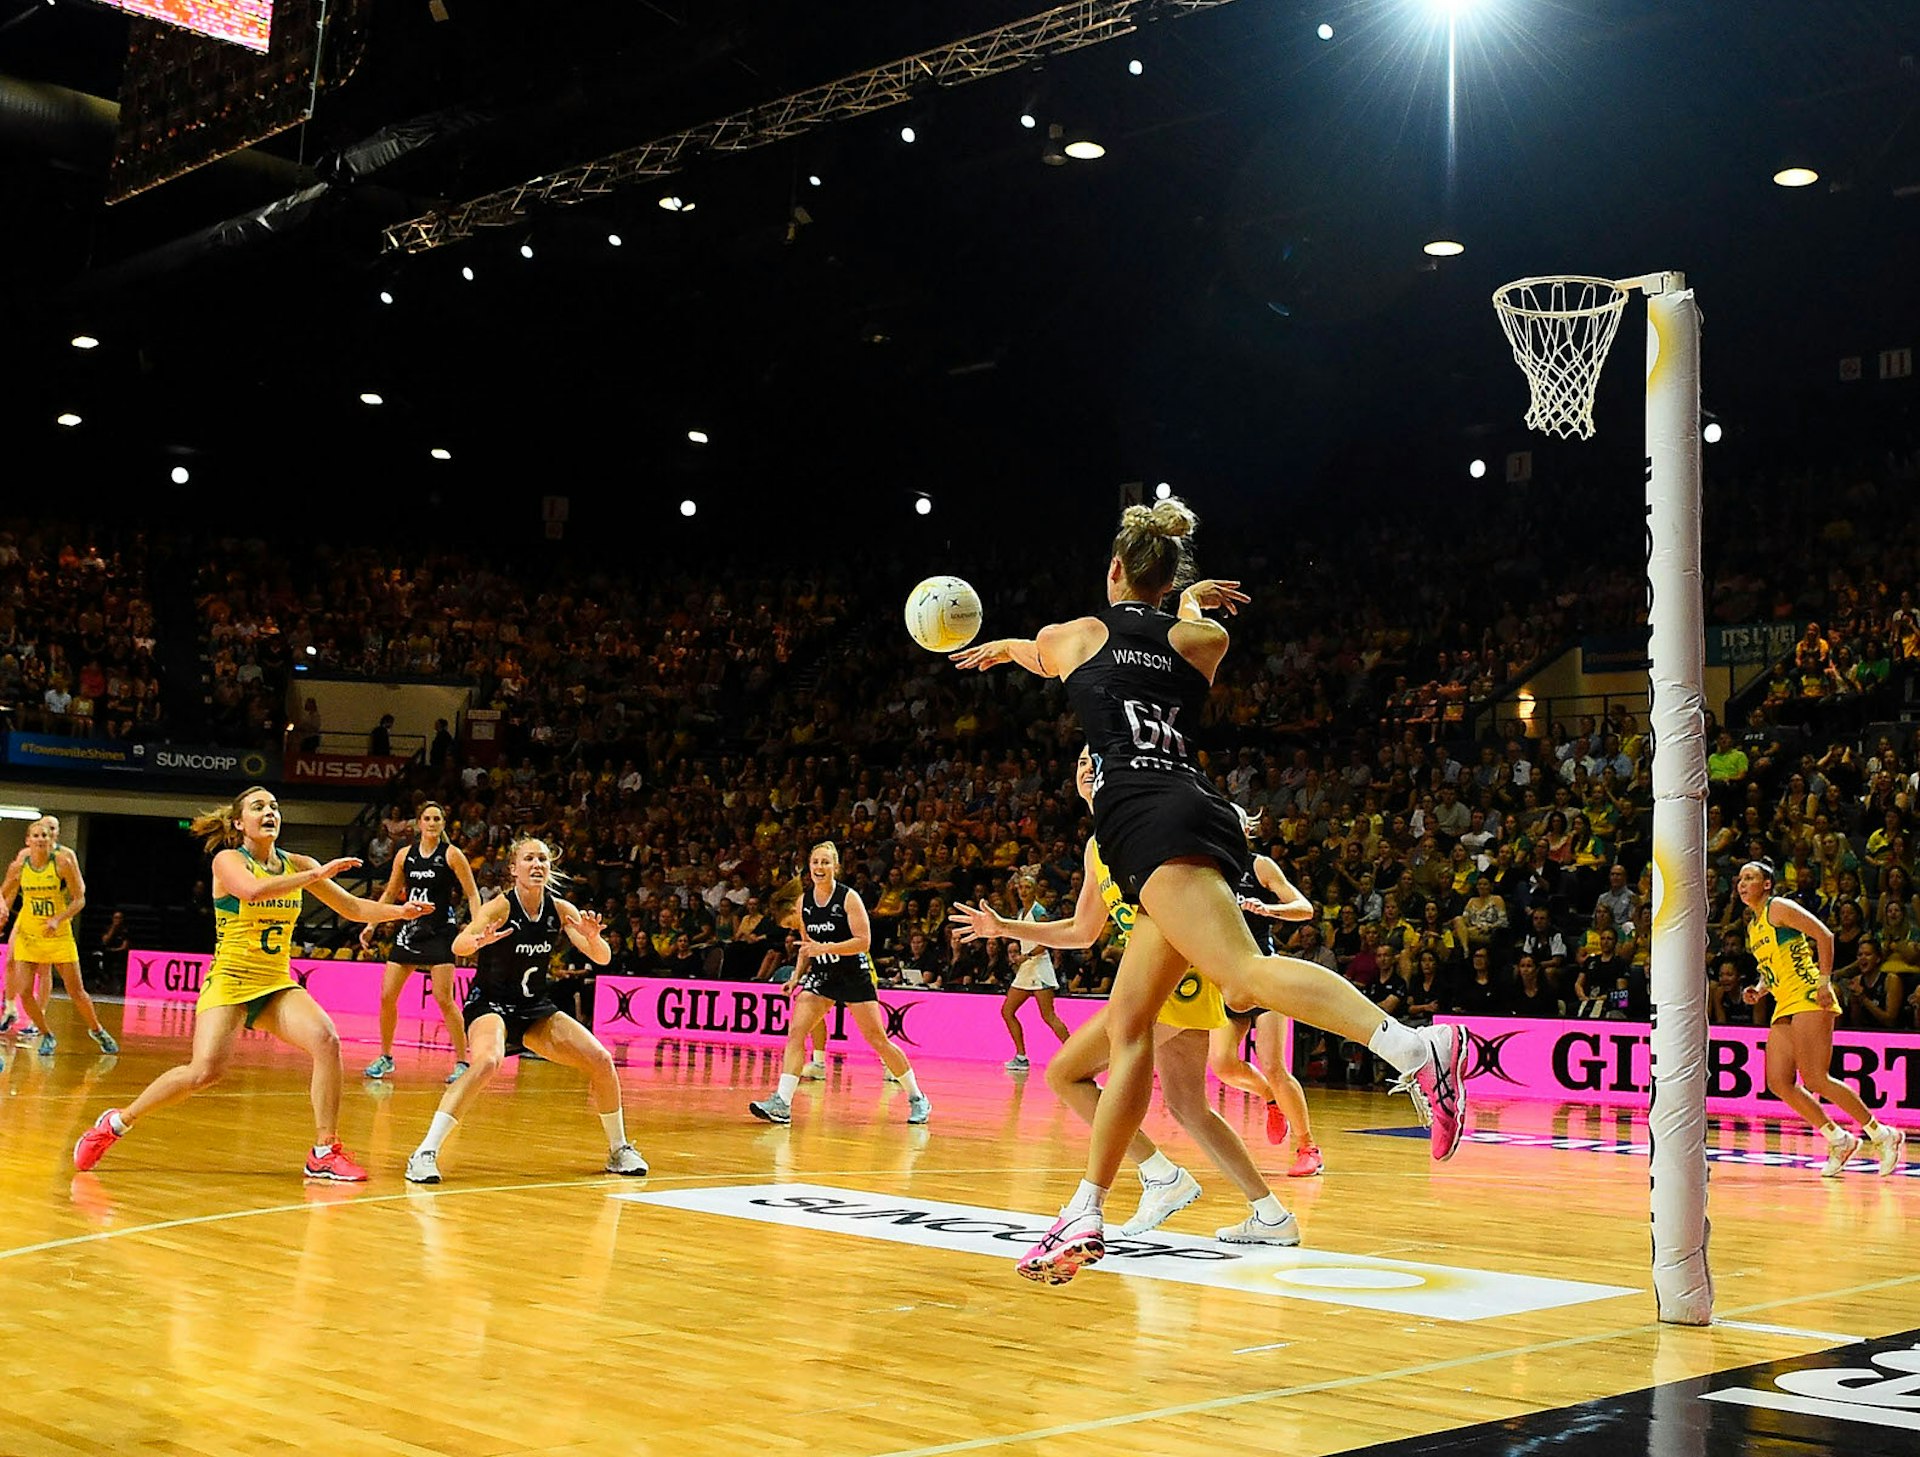  Jane Watson of the Silver Ferns desperately attempts to keep the ball in during the Constellation Cup match between the Australian Diamonds and the New Zealand Silver Ferns. In the background a large crowd fills the stadium.